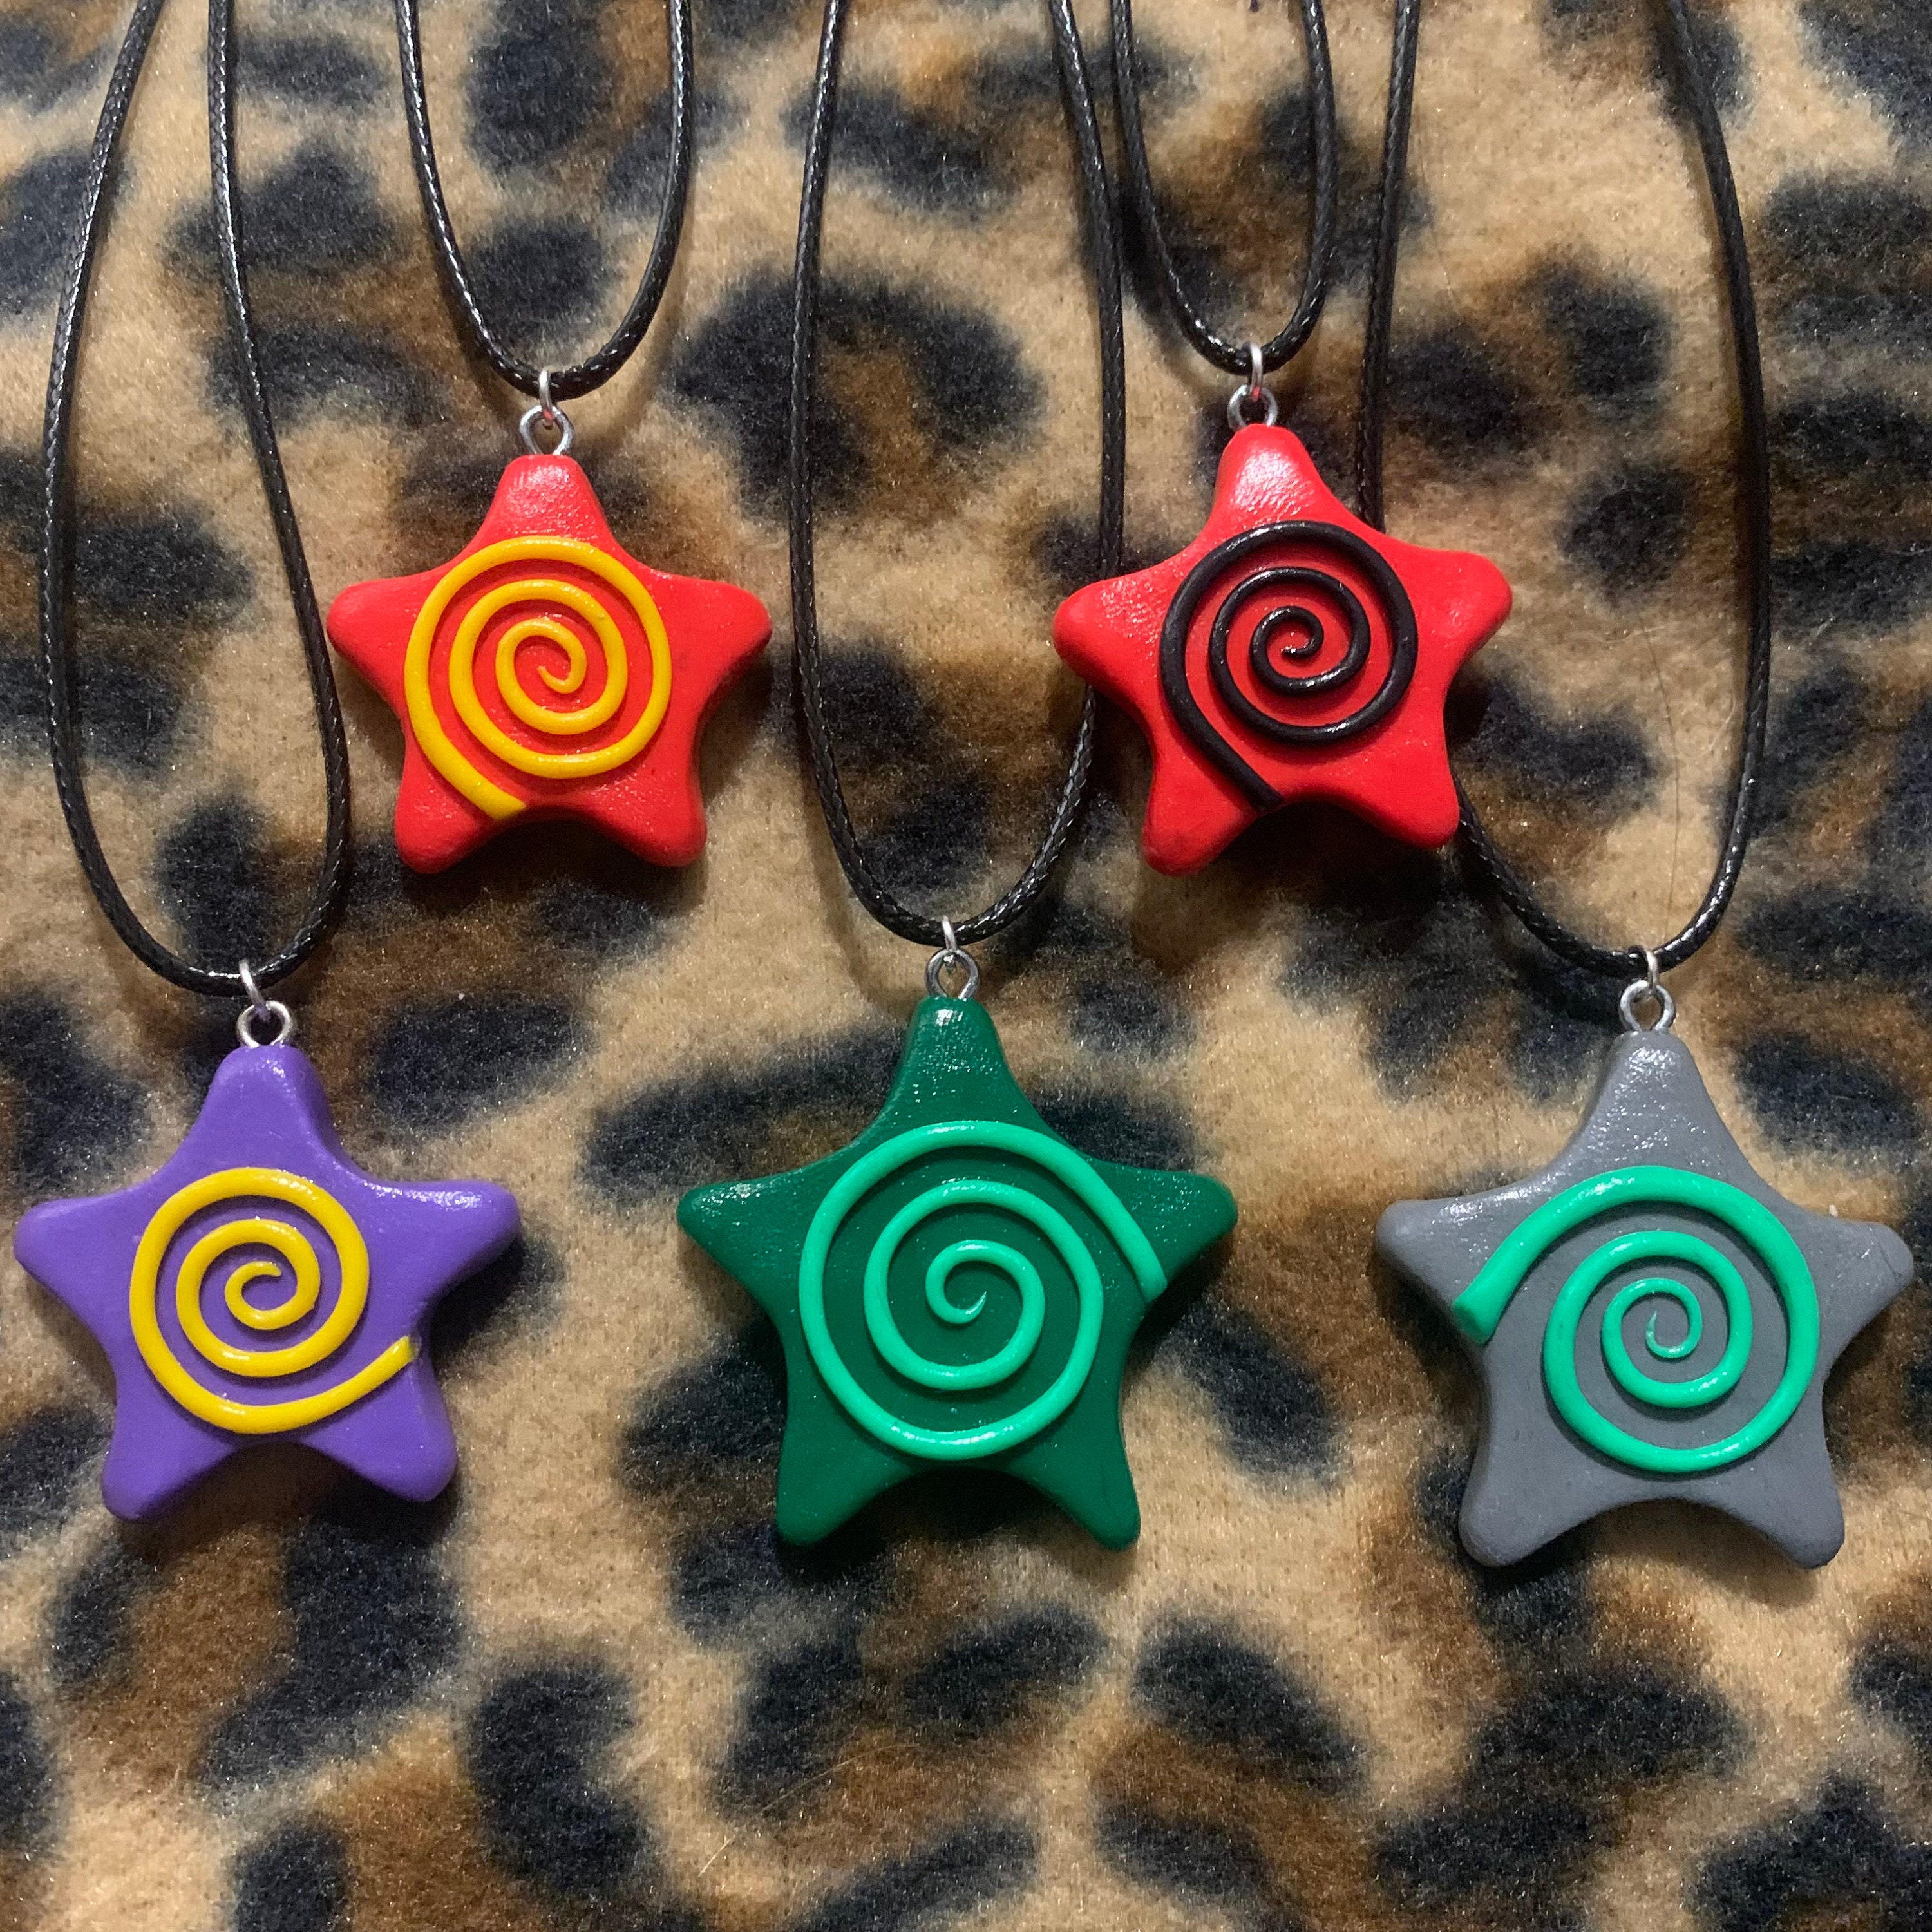 Spiral Star Clay Charm Necklaces, Earrings, Keyrings, Phone Charms and Pin  Badges Grunge Y2k Goblincore Swirl Stars Whimsigoth Pagan 